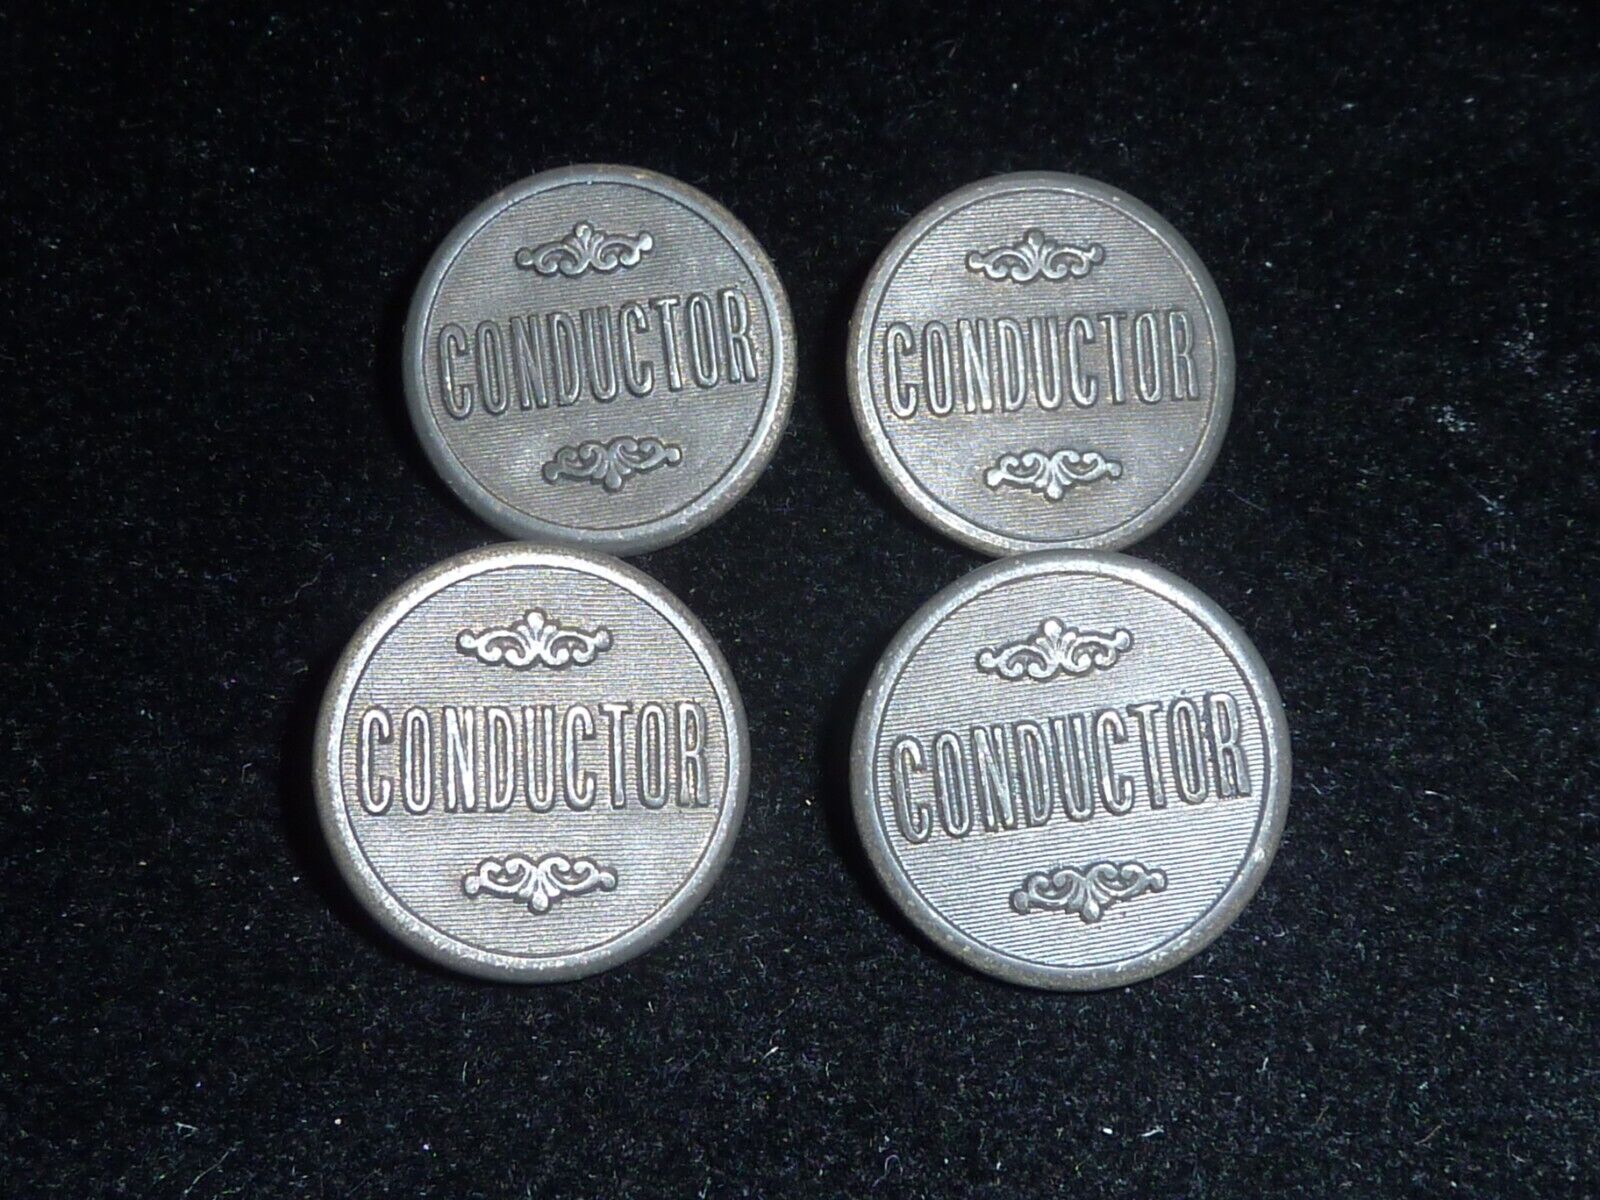 4 Brass railroad Conductor buttons - extra quality